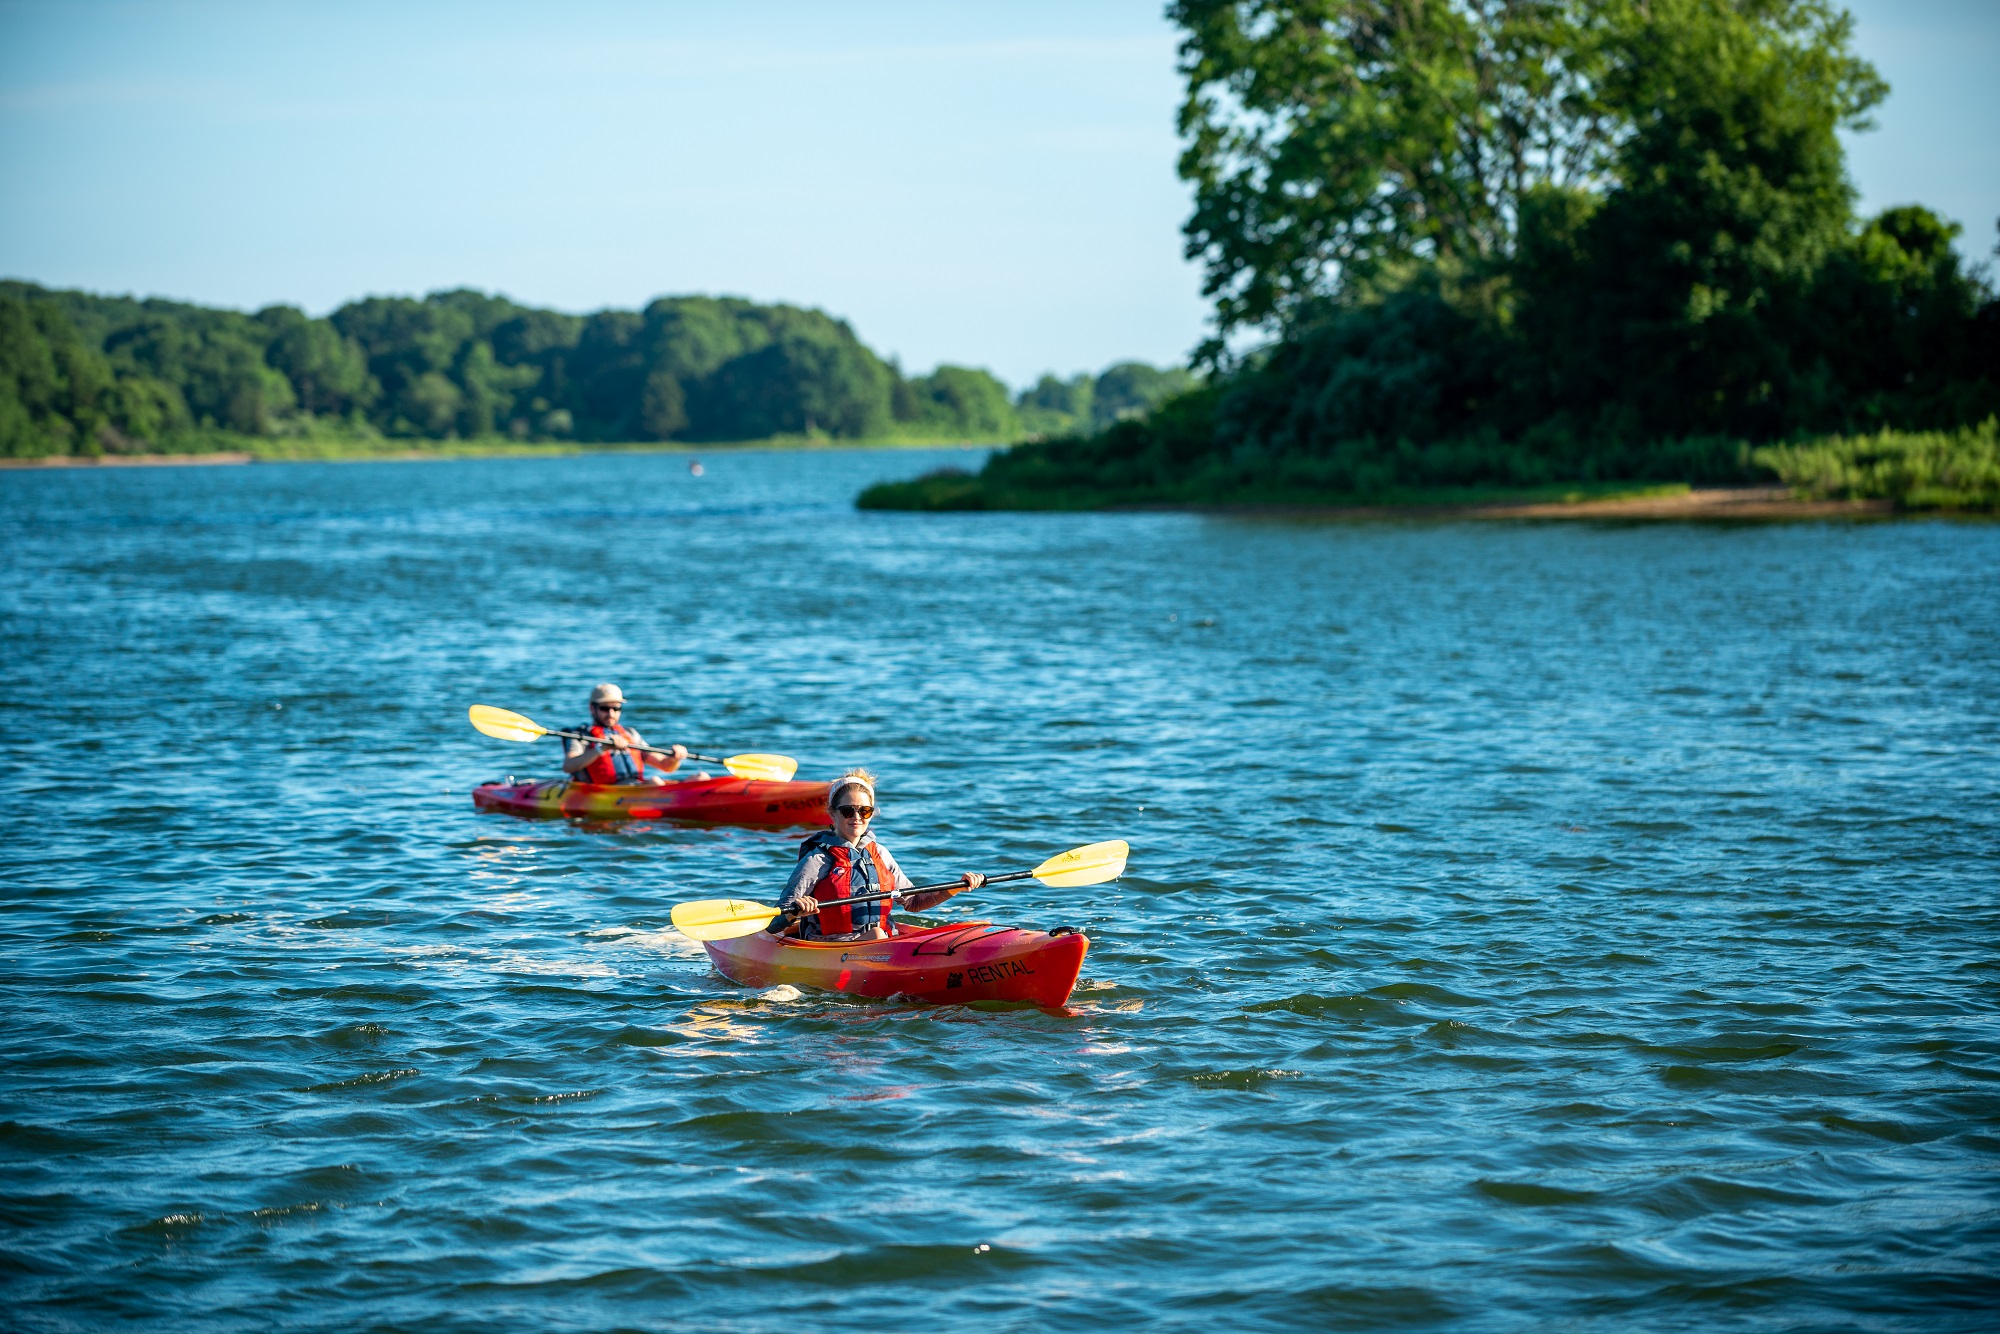 Paddling kayaks with neutrally feathered paddles 